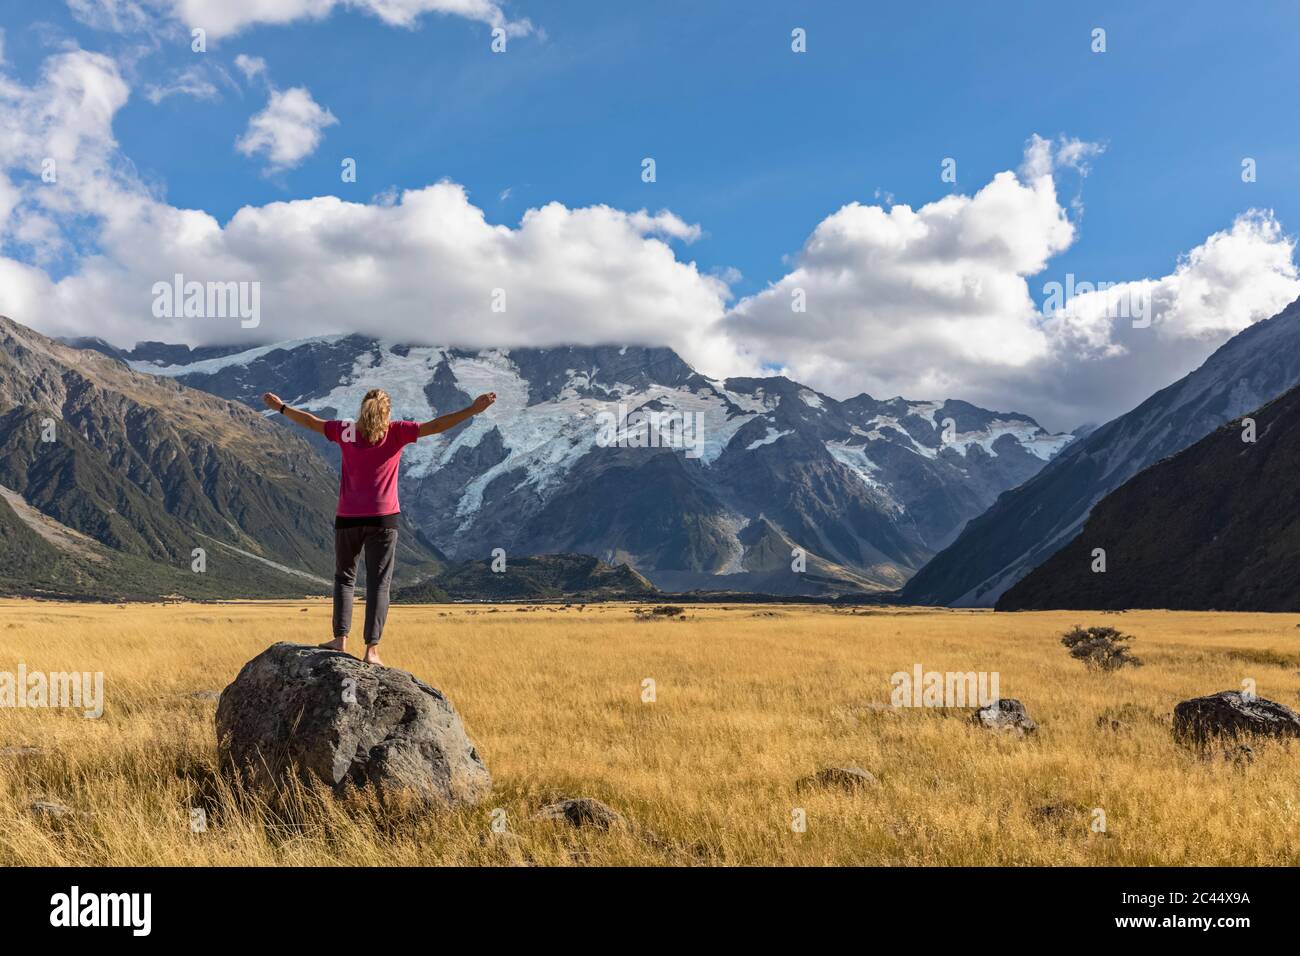 New Zealand, Oceania, South Island, Canterbury, Ben Ohau, Southern Alps (New Zealand Alps), Mount Cook National Park, Aoraki / Mount Cook, Woman standing on boulder in mountain landscape Stock Photo